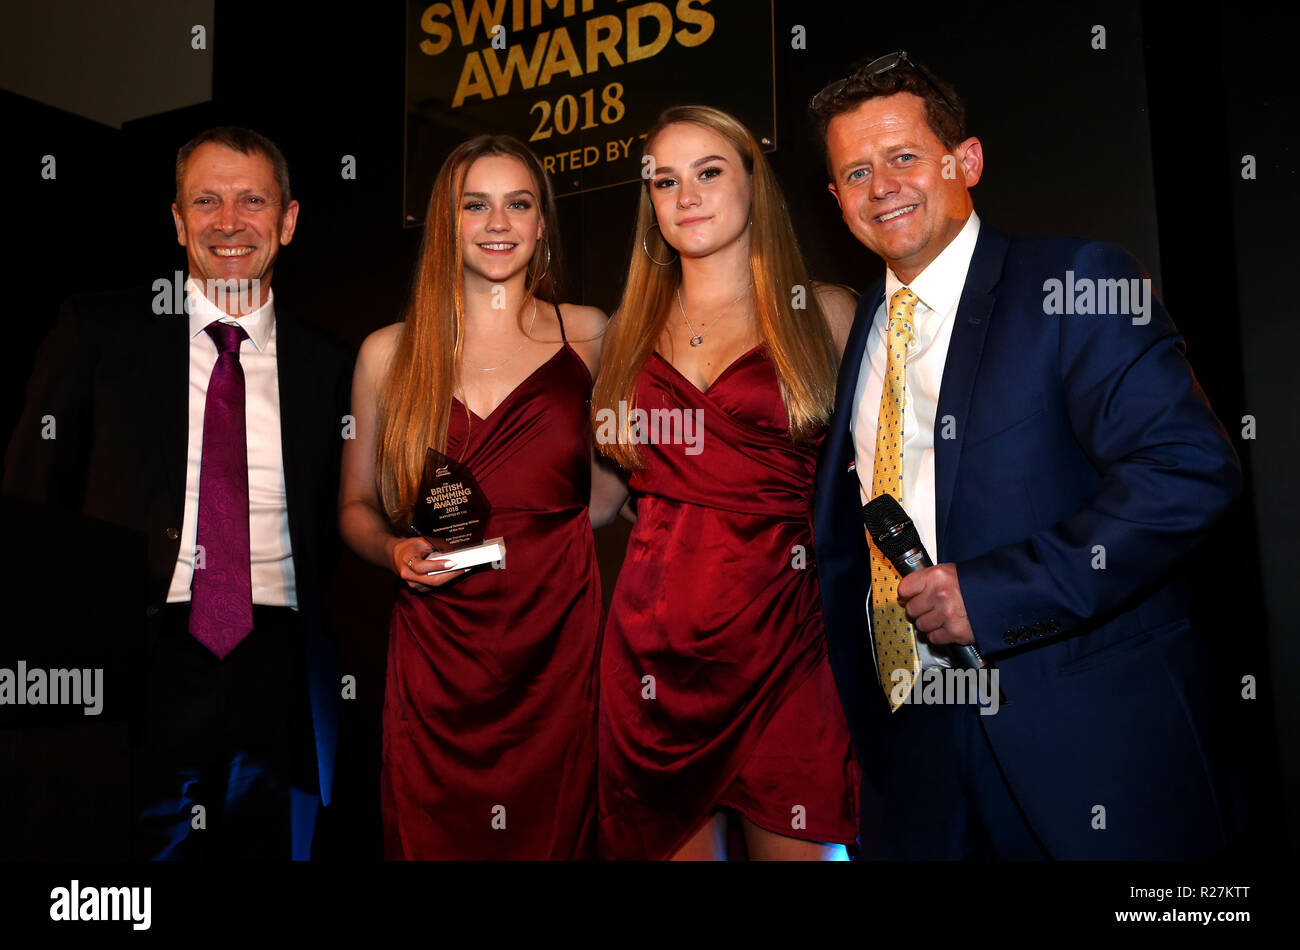 Synchronised Swimming athlete of the year winners Kate Shortman and Isabelle Thorpe (right) with presenter Mike Bushell and award presenter Jack Buckner during the British Swimming Awards 2018 at the Point, Lancashire County Cricket Club, Manchester Stock Photo